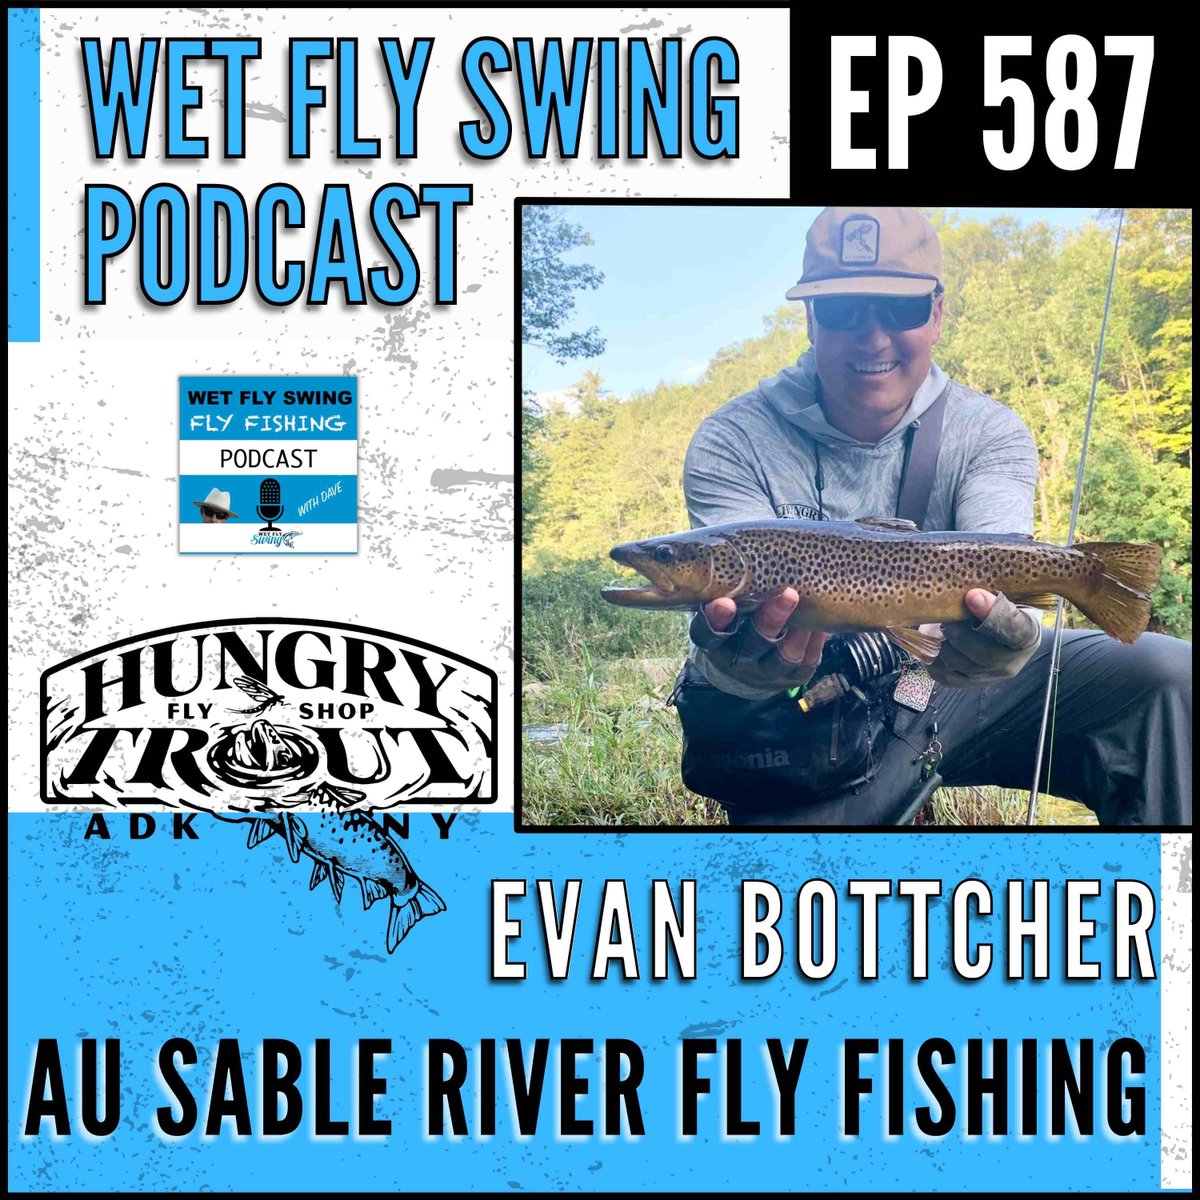 Today we have Evan Bottcher, owner of the Hungry Trout, to guide us in fly fishing the Au Sable with Dry Flies. Listen Here >> buff.ly/3vpp6RQ